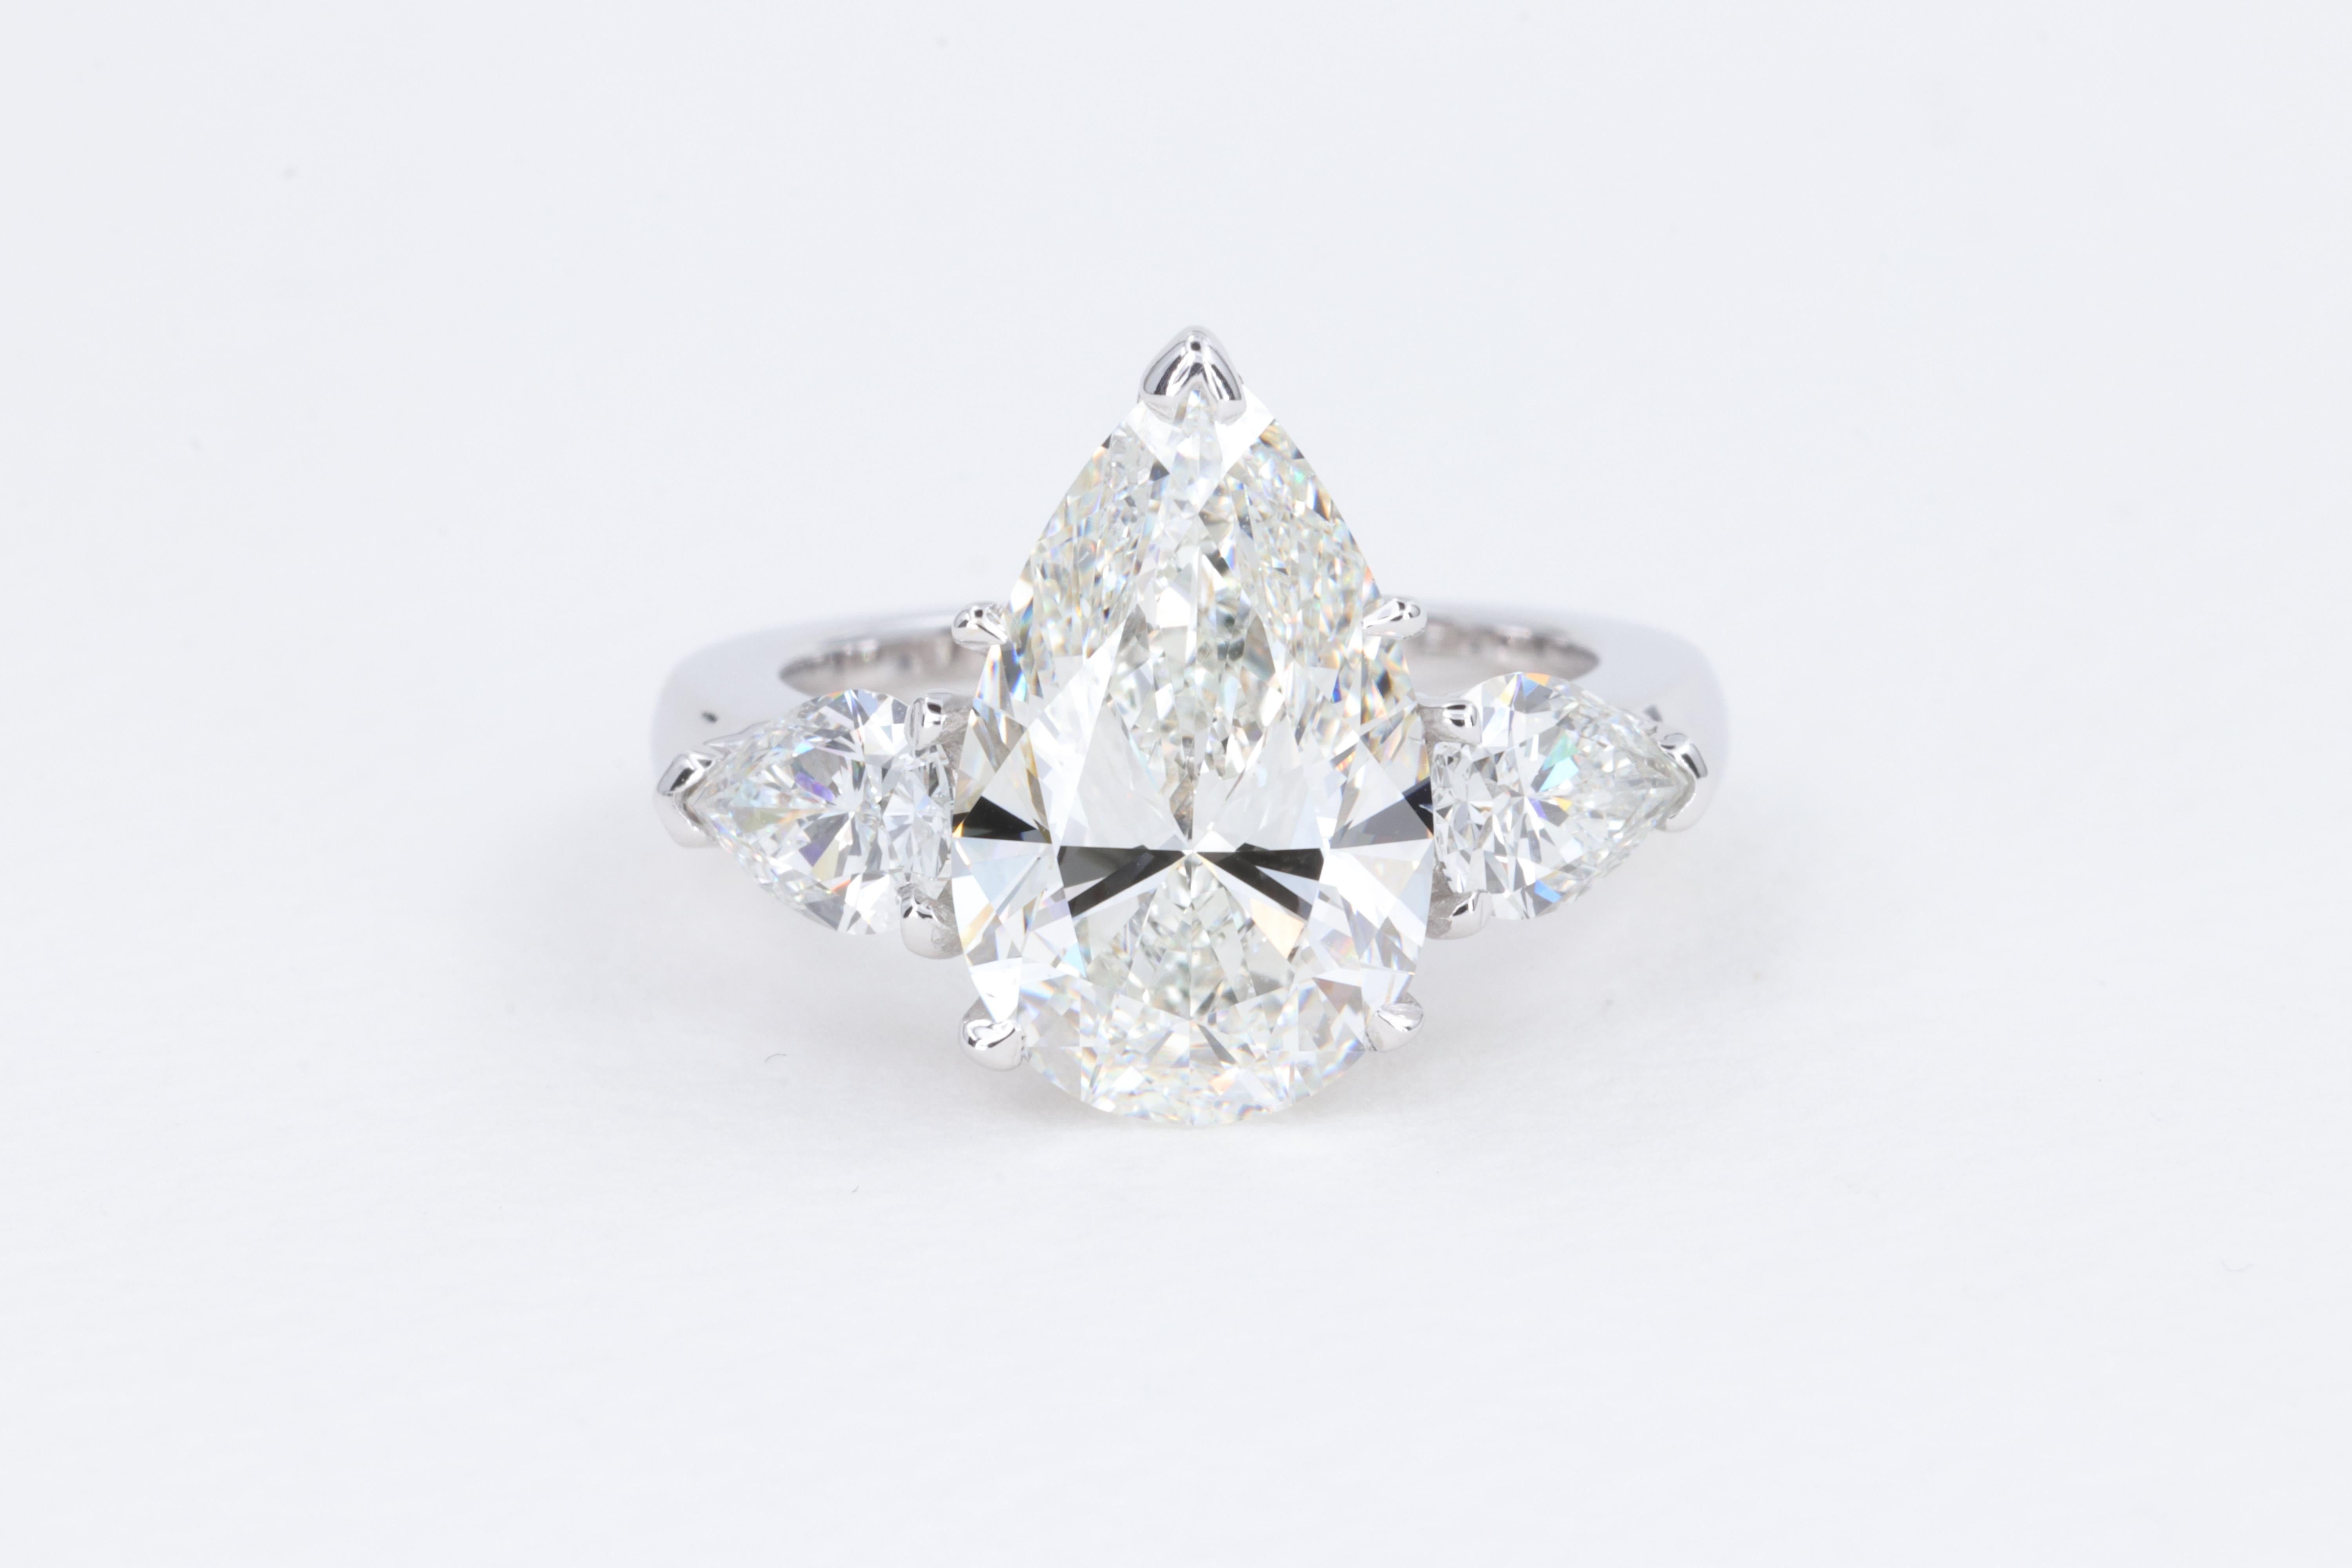 5.50 Carat GIA Natural Diamond Pear Shape Engagement Ring in 18 Karat White Gold

A perfectly done classic 3 stone diamond engagement ring set with a 4.50 carat H color SI1 clarity pear shape center diamond cut to a perfect model and proportions